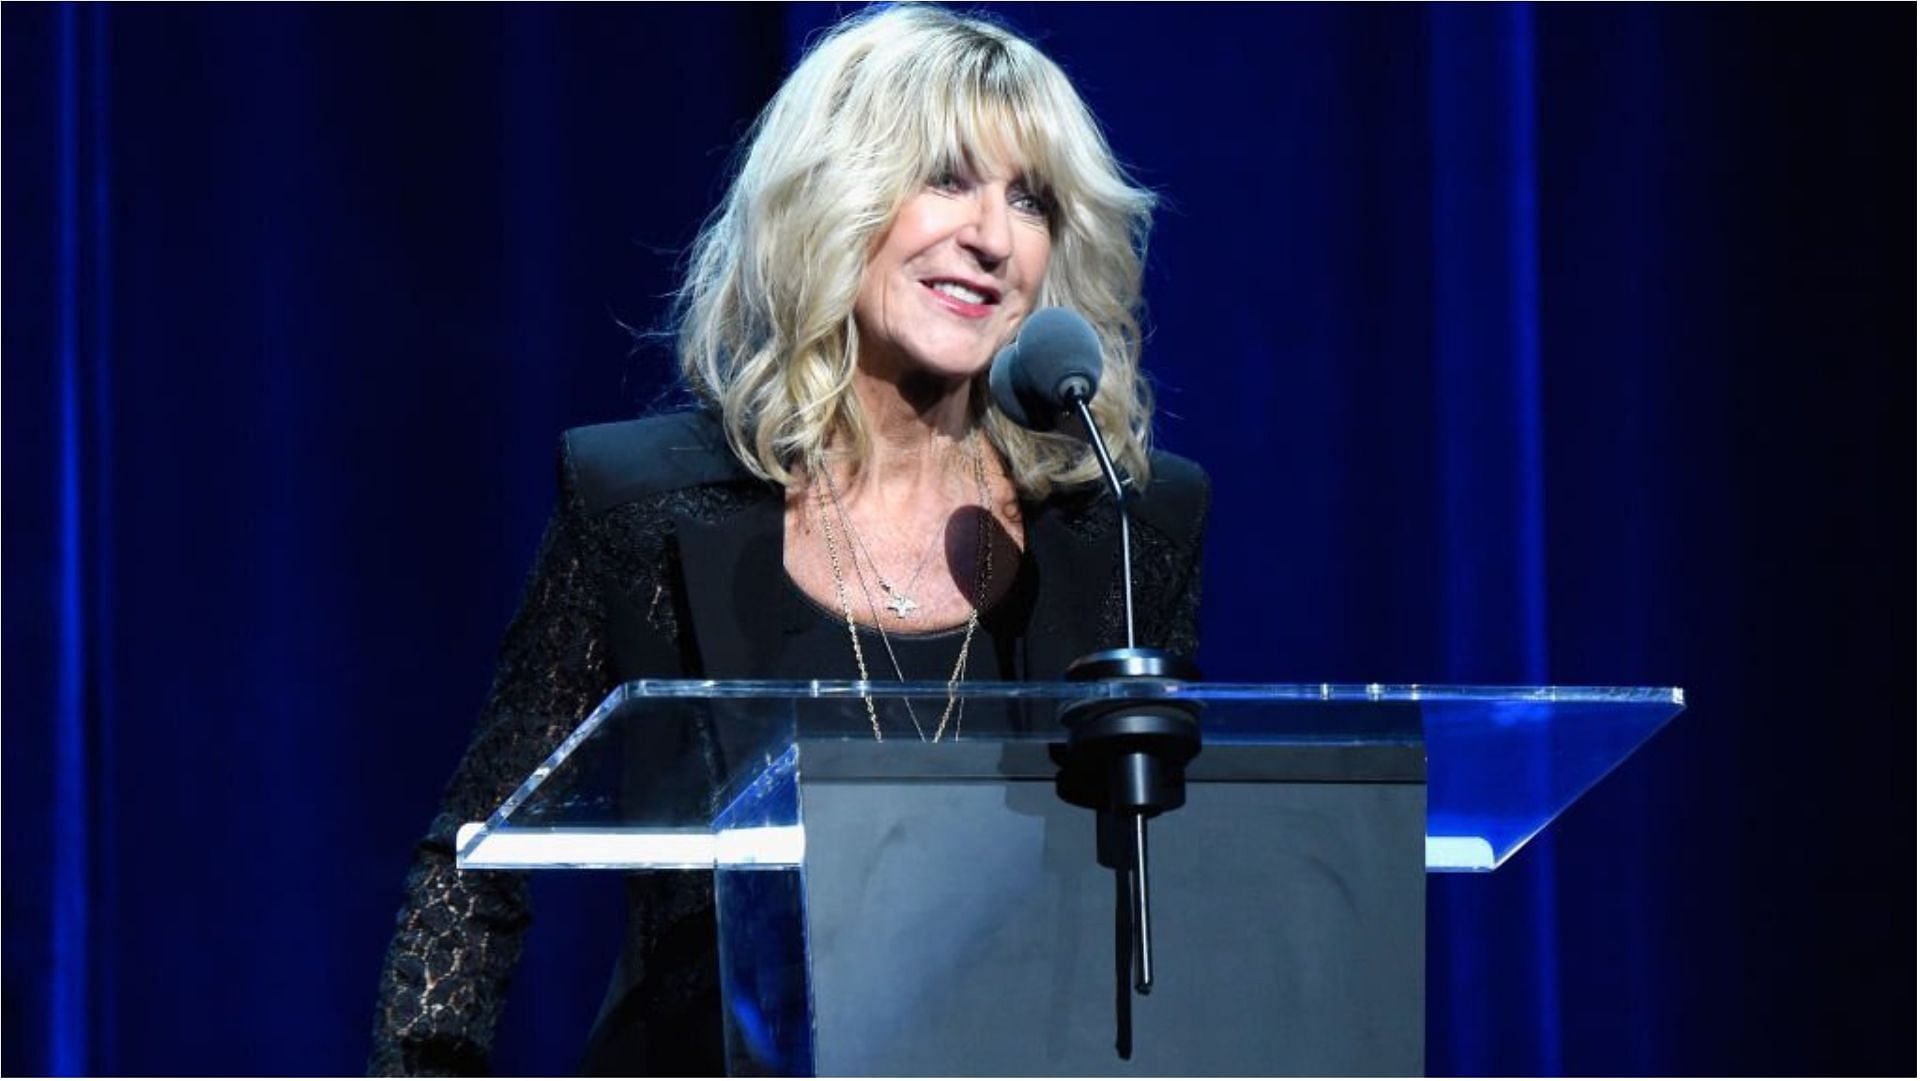 Christine McVie earned a lot from her career in the music industry (Image via Kevin Mazur/Getty Images)